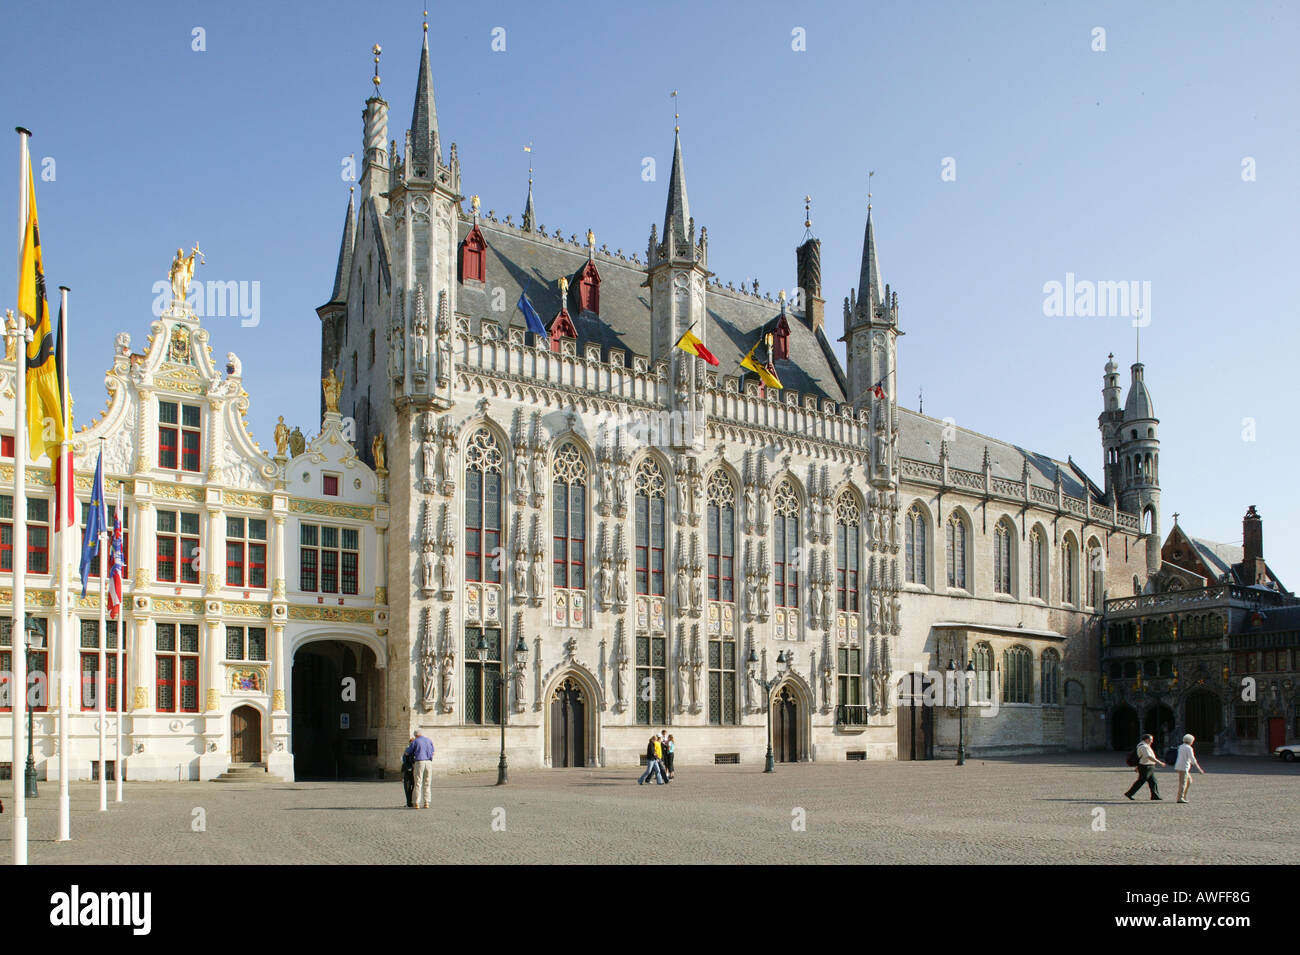 The town hall, castle, Bruges, Flanders, Belgium, Europe Stock Photo